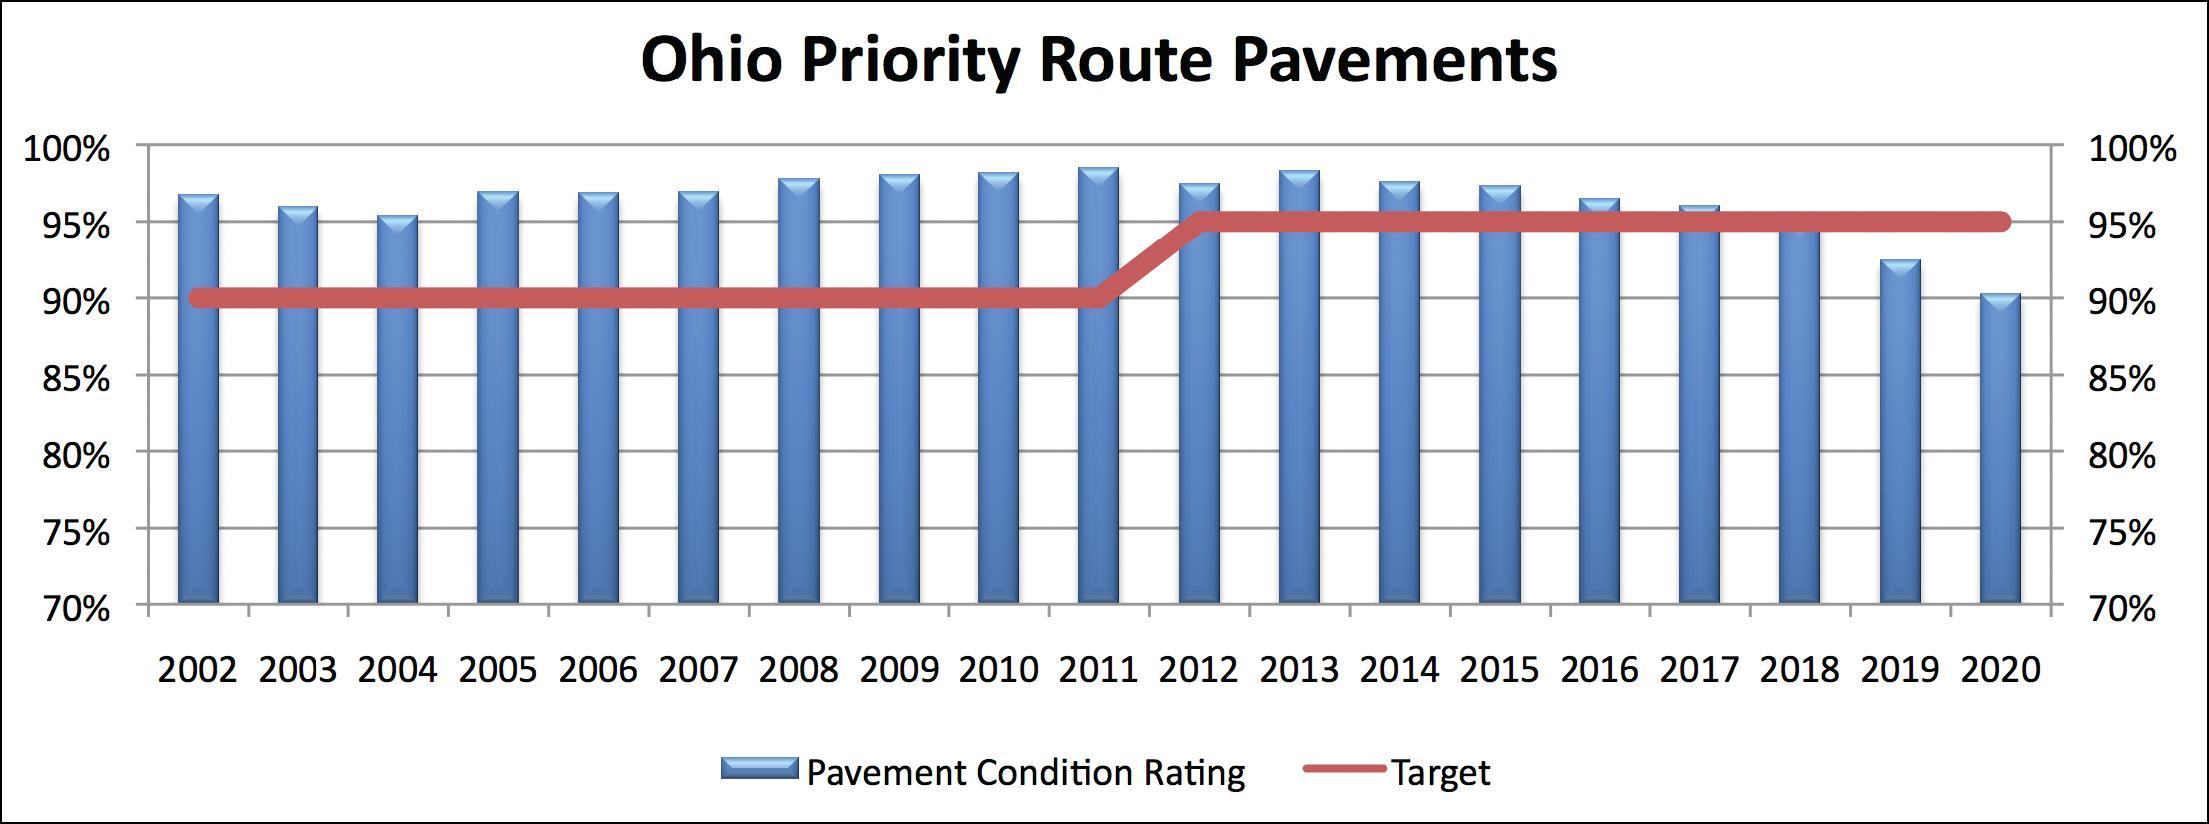 Figure 17 illustrates the pavement condition rating compared to the targeted condition for Ohio's priority route pavements. The chart illustrates trends from 2002 through 2020. Vertical bars indicate that Ohio's pavement condition rating ranged from 2002 through approximately 2018 at 95 percent or higher.  The target is displayed as a horizontal line which is at 90 percent for 2002 through 2011 when the target increased to 95 percent.  The chart illustrates that from 2002 through 2018 the conditions were above target and they are forecast to fall below the 95 percent target for the years 2019 and 2020. 